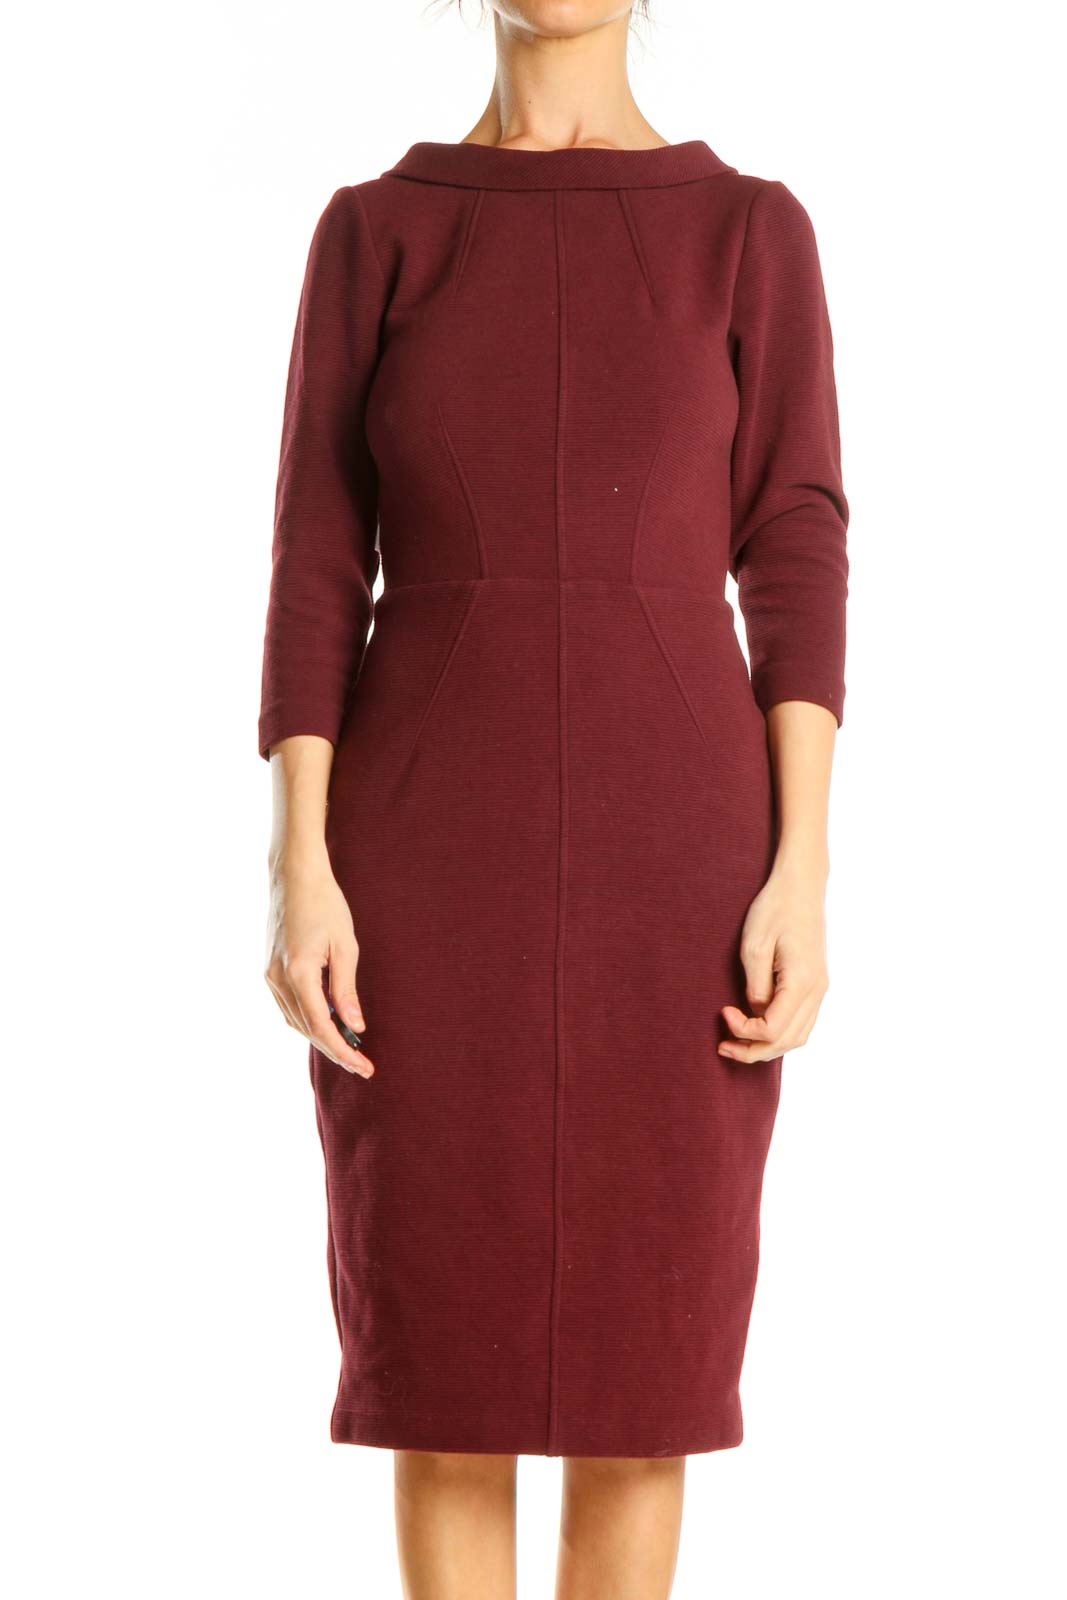 Red Classic Knit Sheath Dress Front